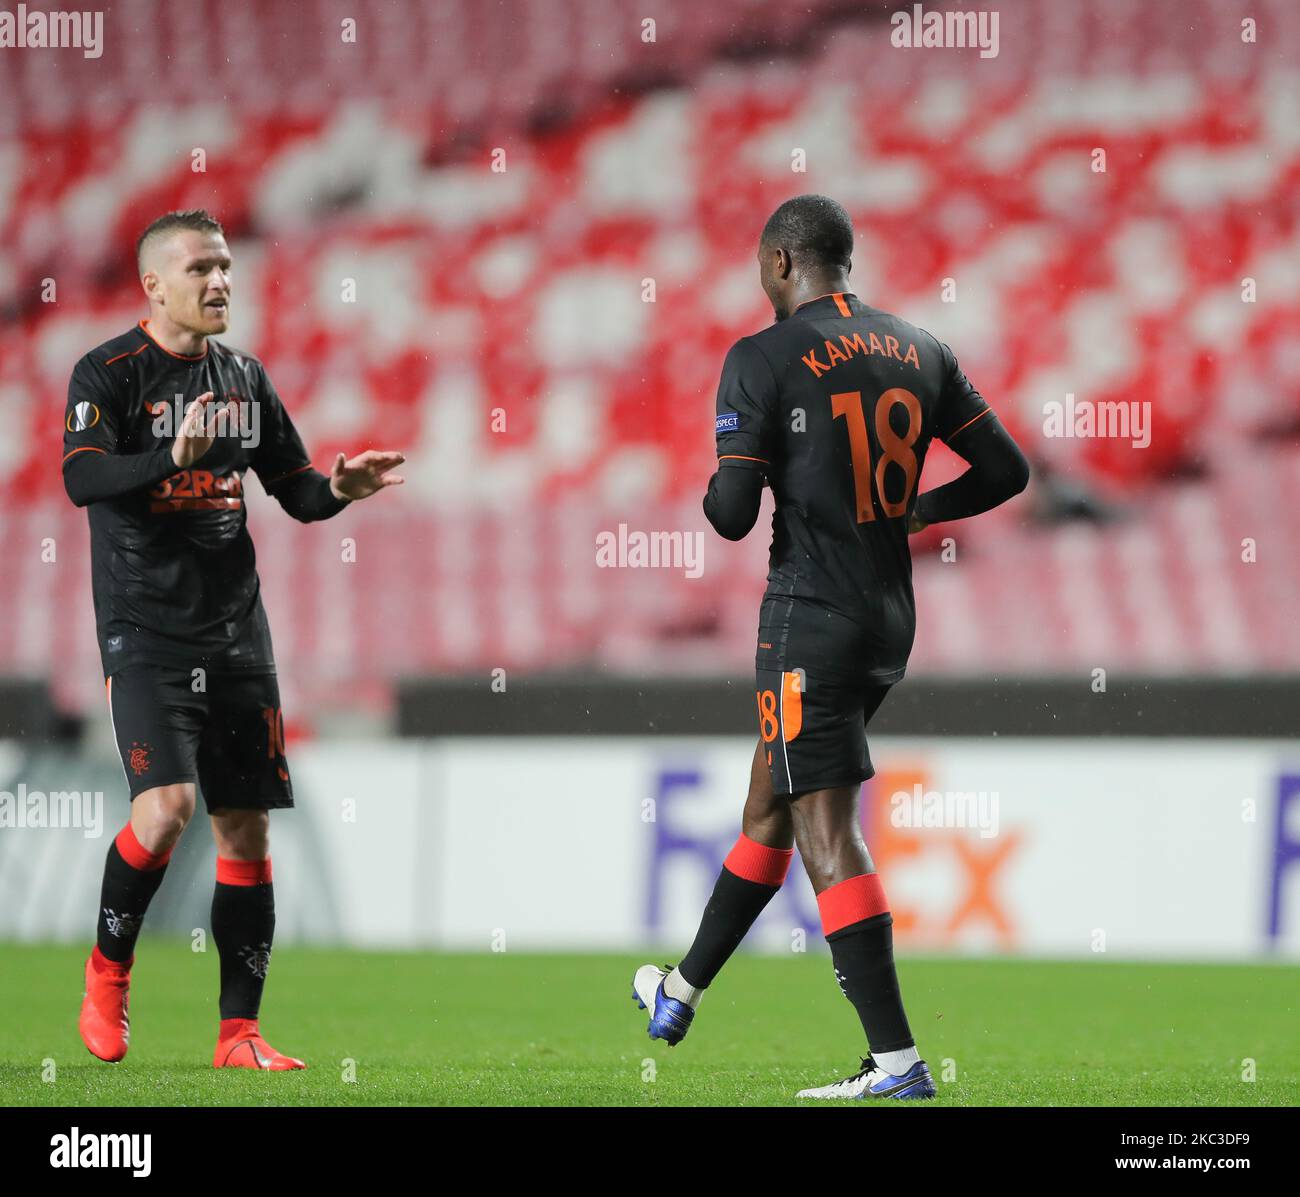 Glen Kamara of Rangers FC celebrates after scoring a goal during the UEFA Europa League Group D stage match between SL Benfica and Rangers FC at Estadio da Luz on November 5, 2020 in Lisbon, Portugal. (Photo by Paulo Nascimento/NurPhoto) Stock Photo